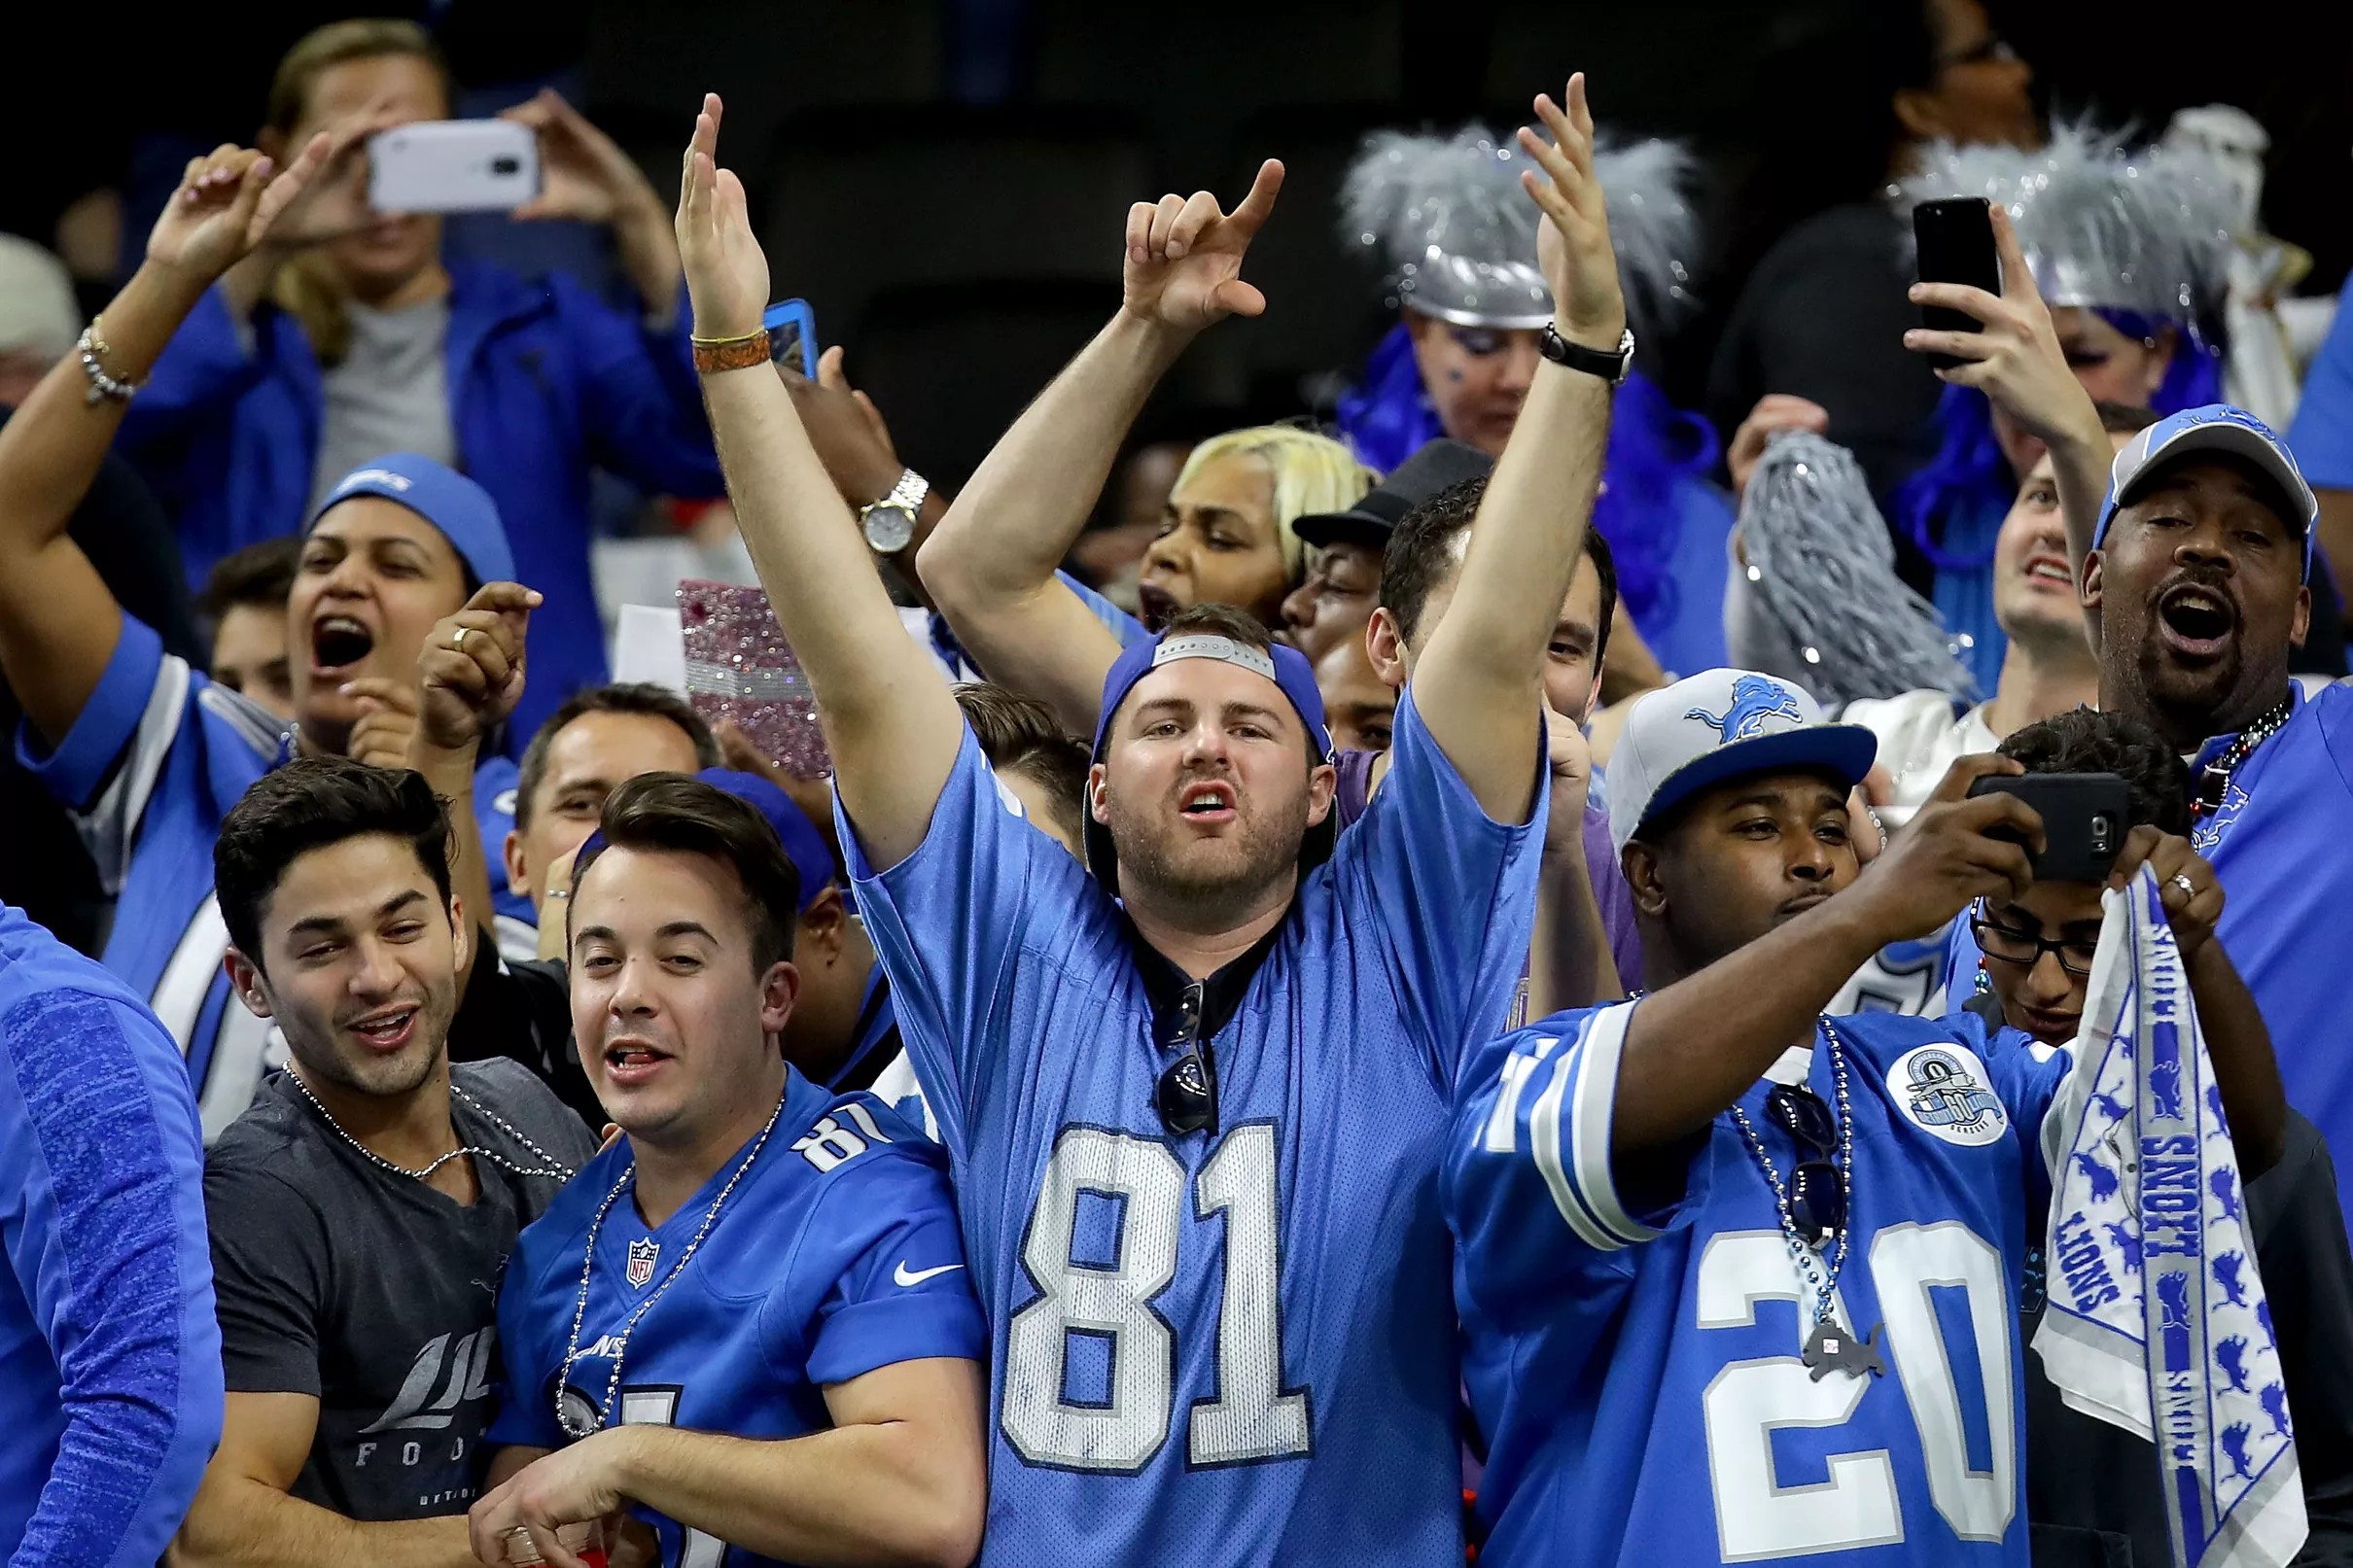 WATCH LIVE Detroit Lions Draft Party reacts to firstround pick